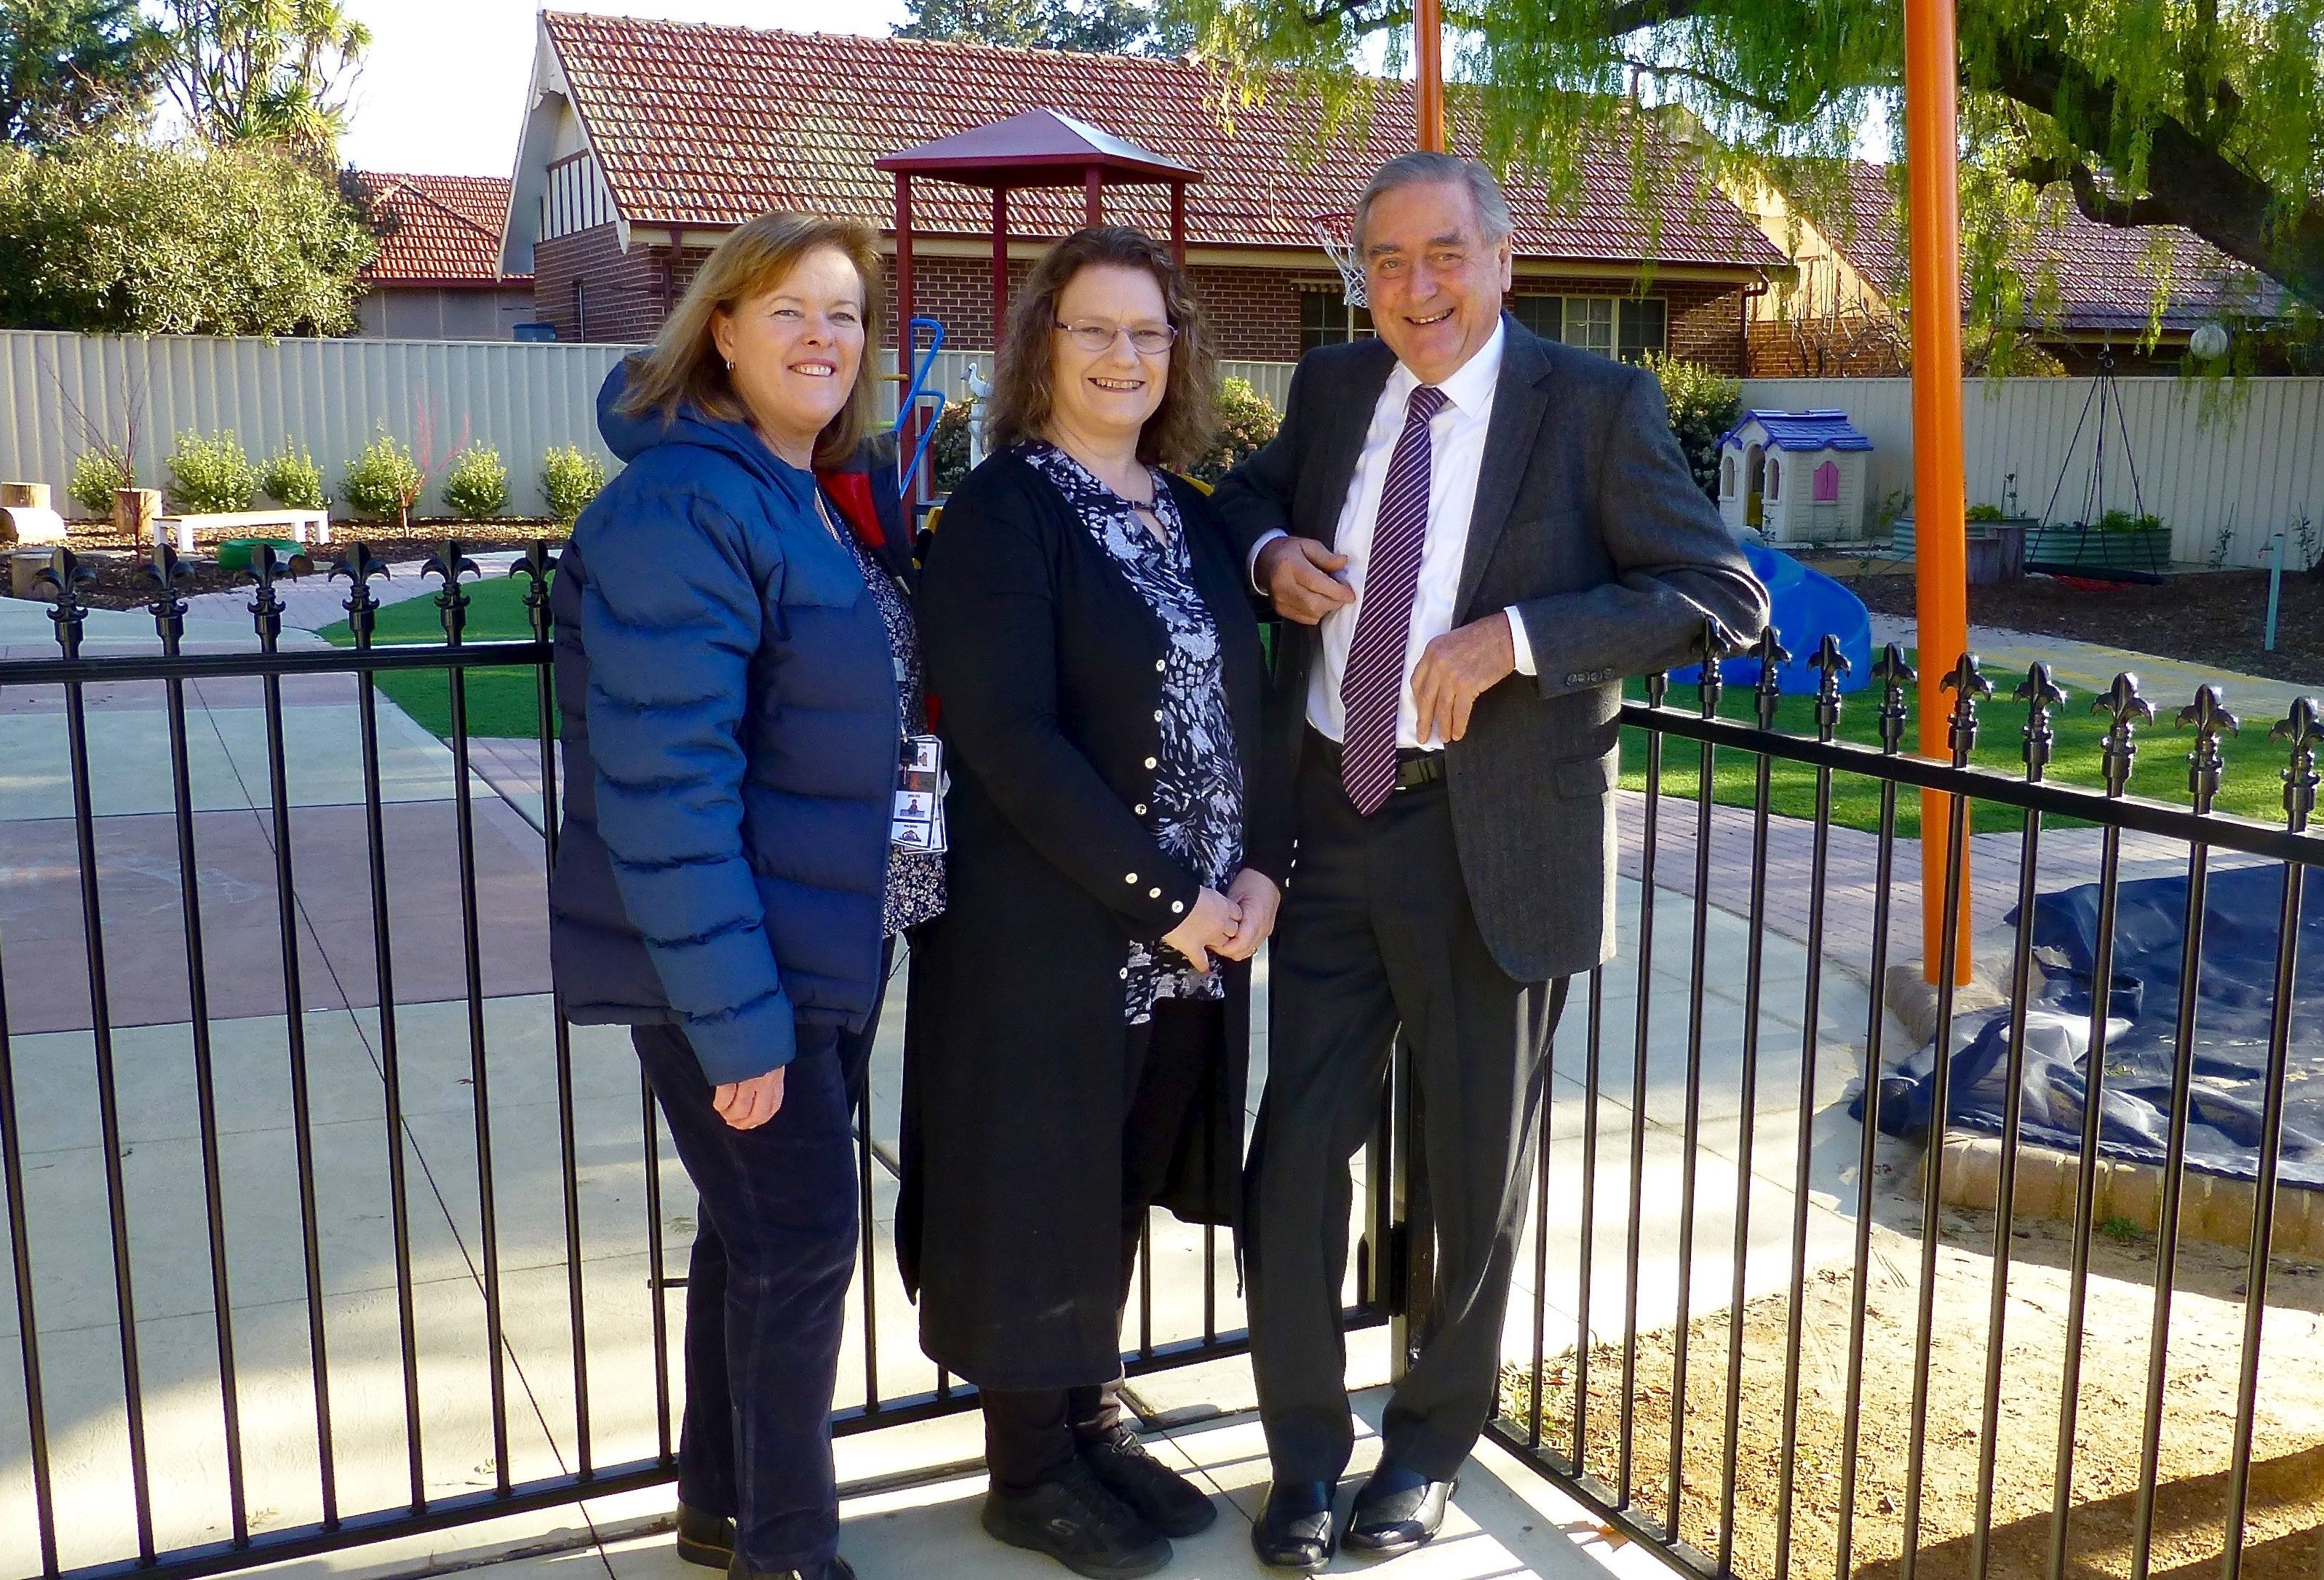 Treehouse village branches into Queanbeyan community